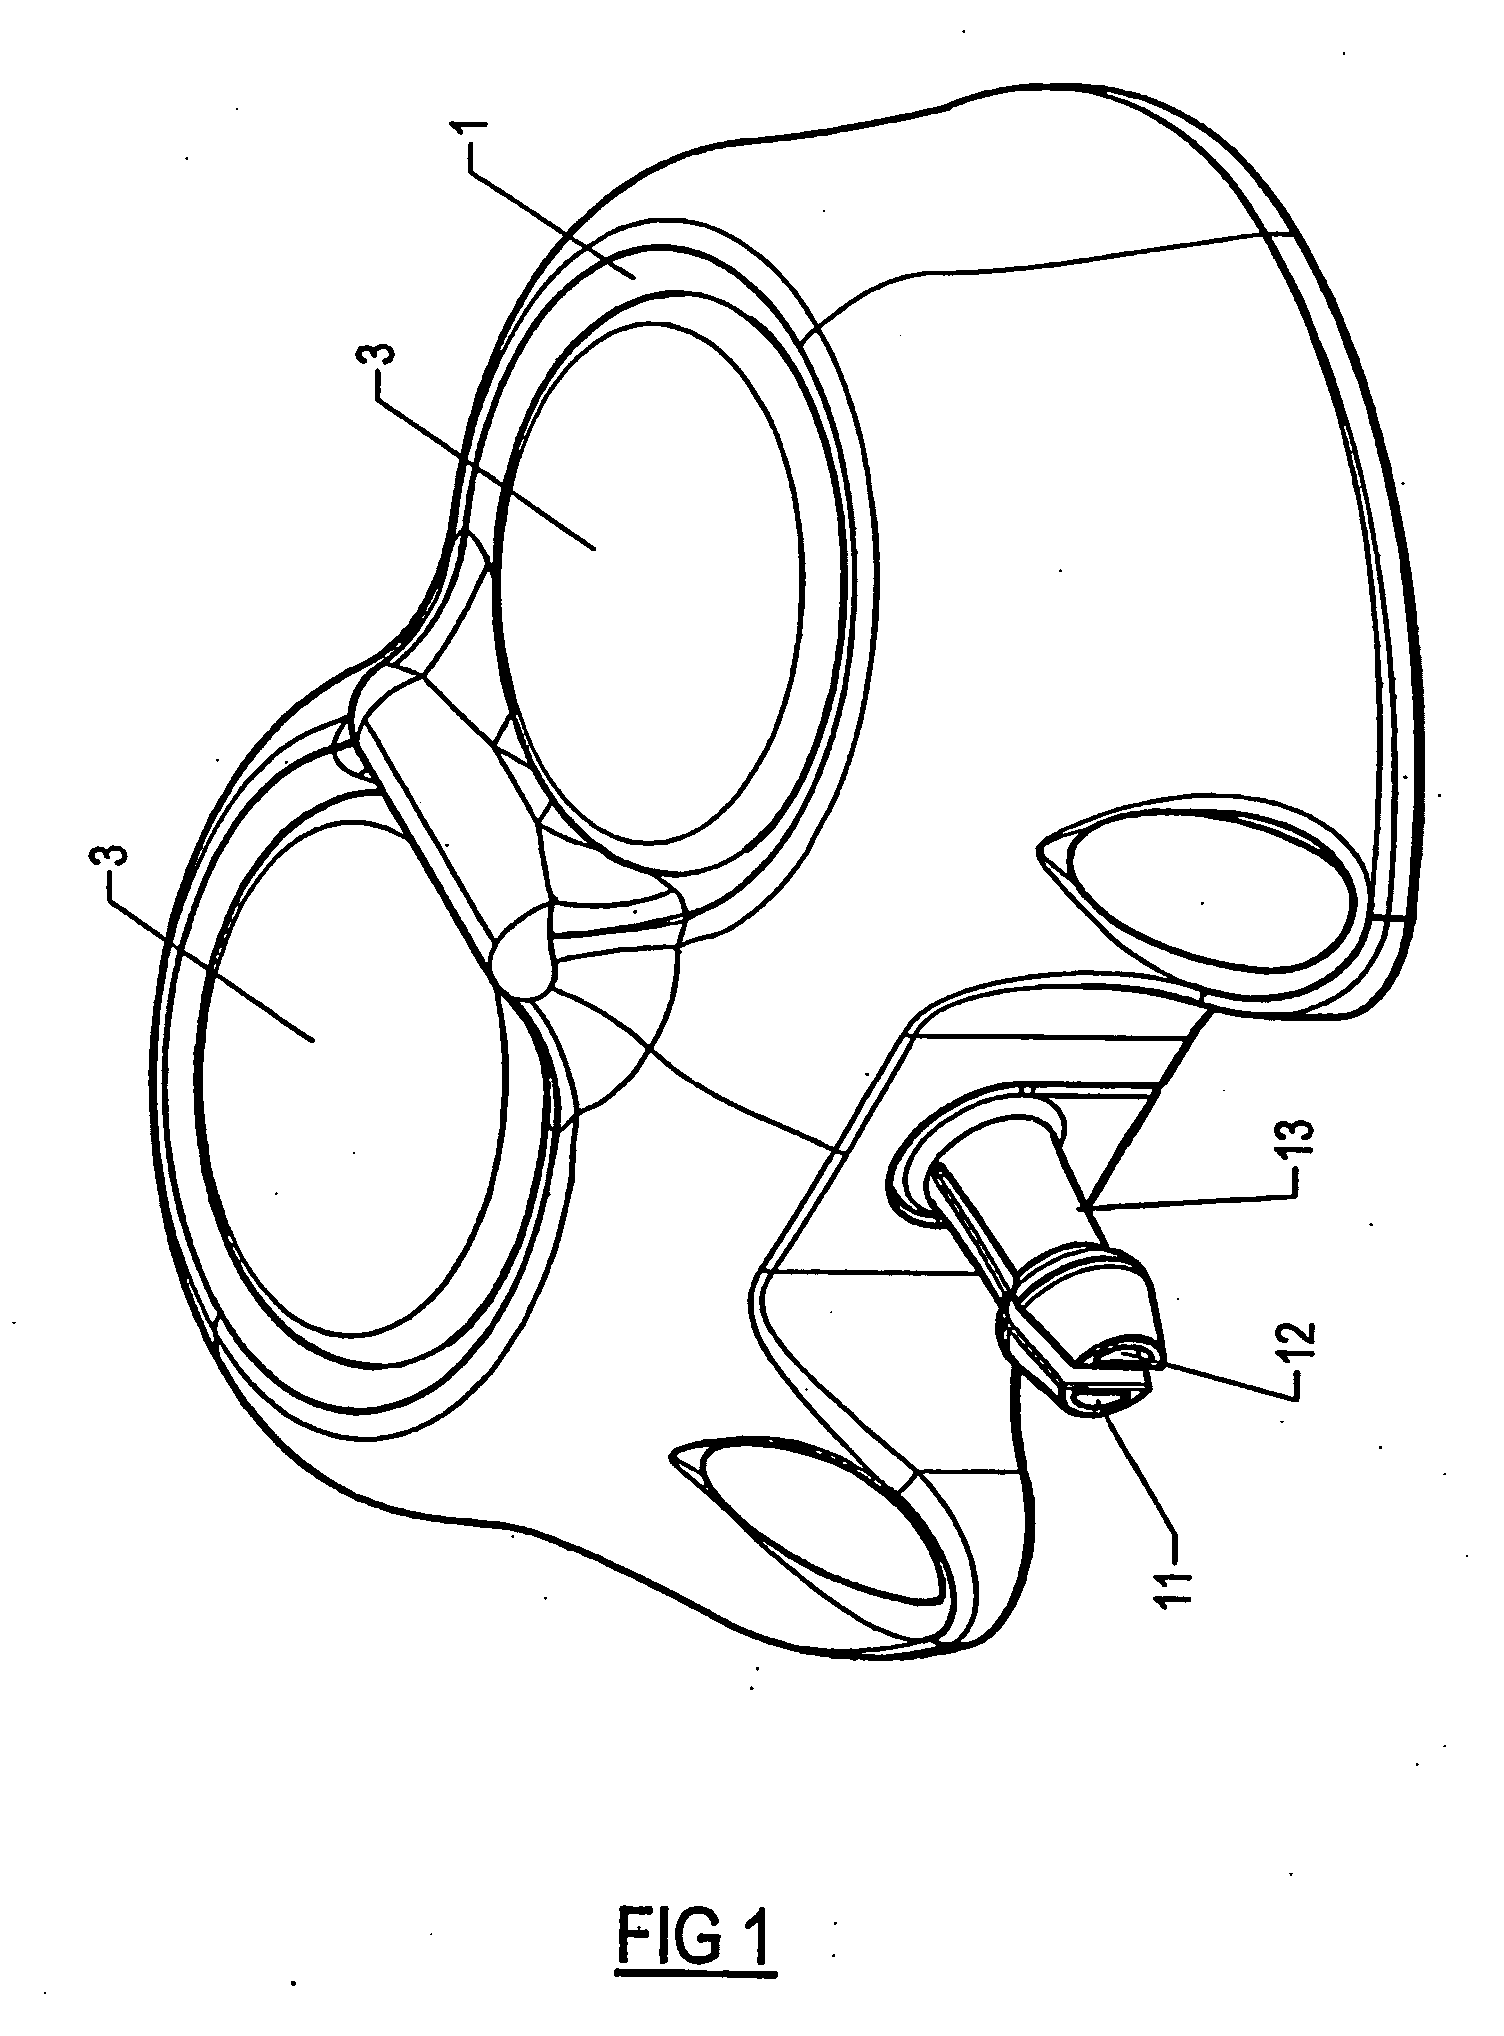 Port design and method of assembly